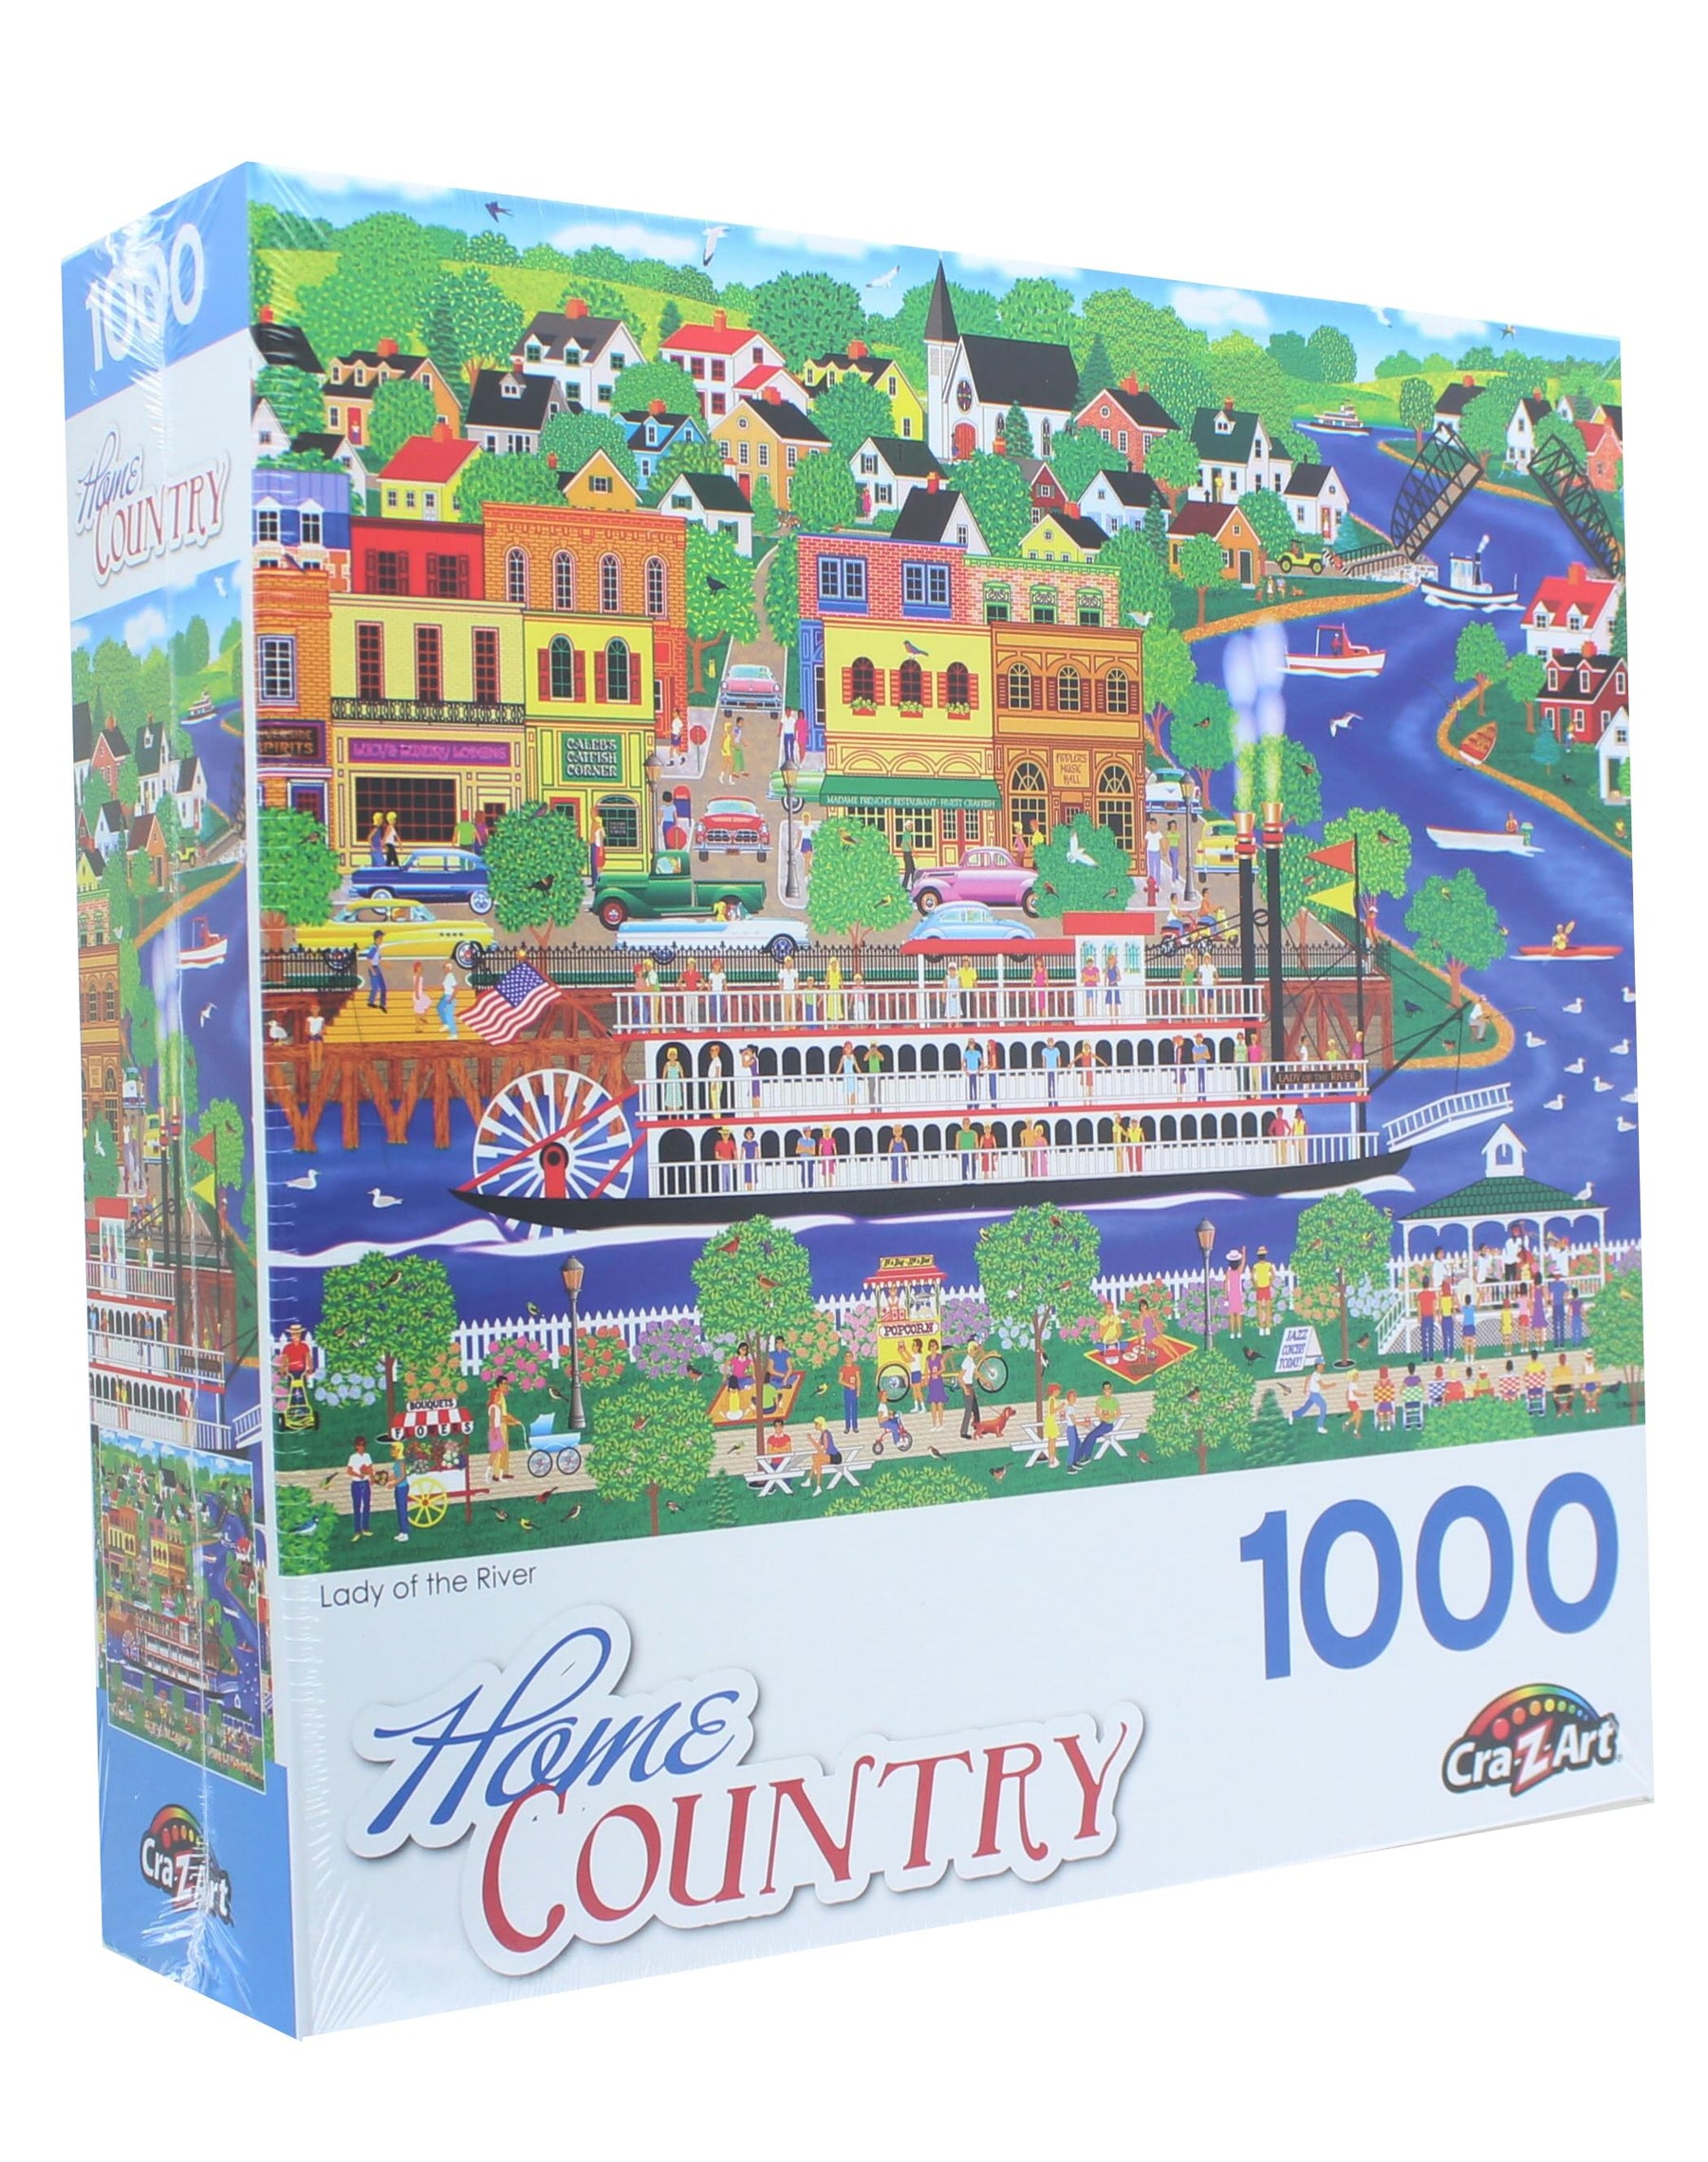 Lady of the River 1000 Piece Jigsaw Puzzle